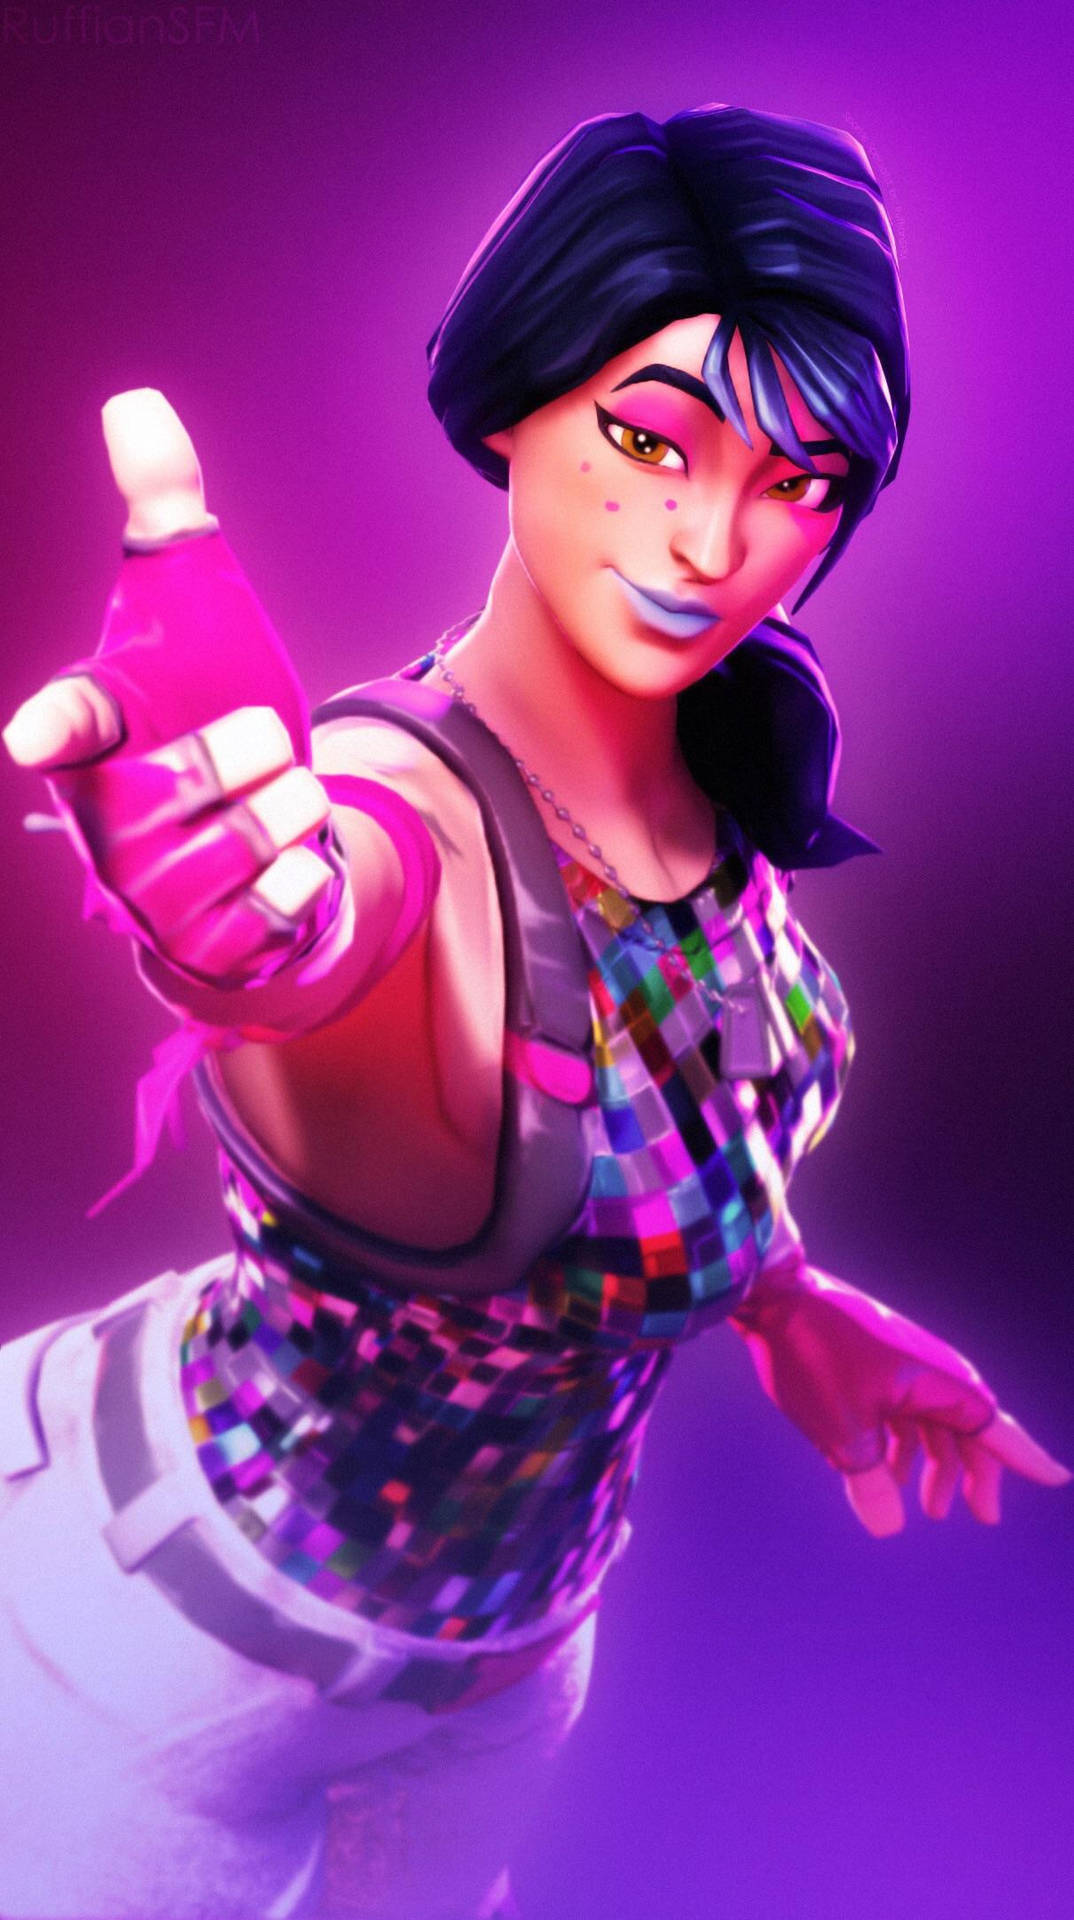 "Unlock your powerful potential with Sparkle Specialist Fortnite!" Wallpaper